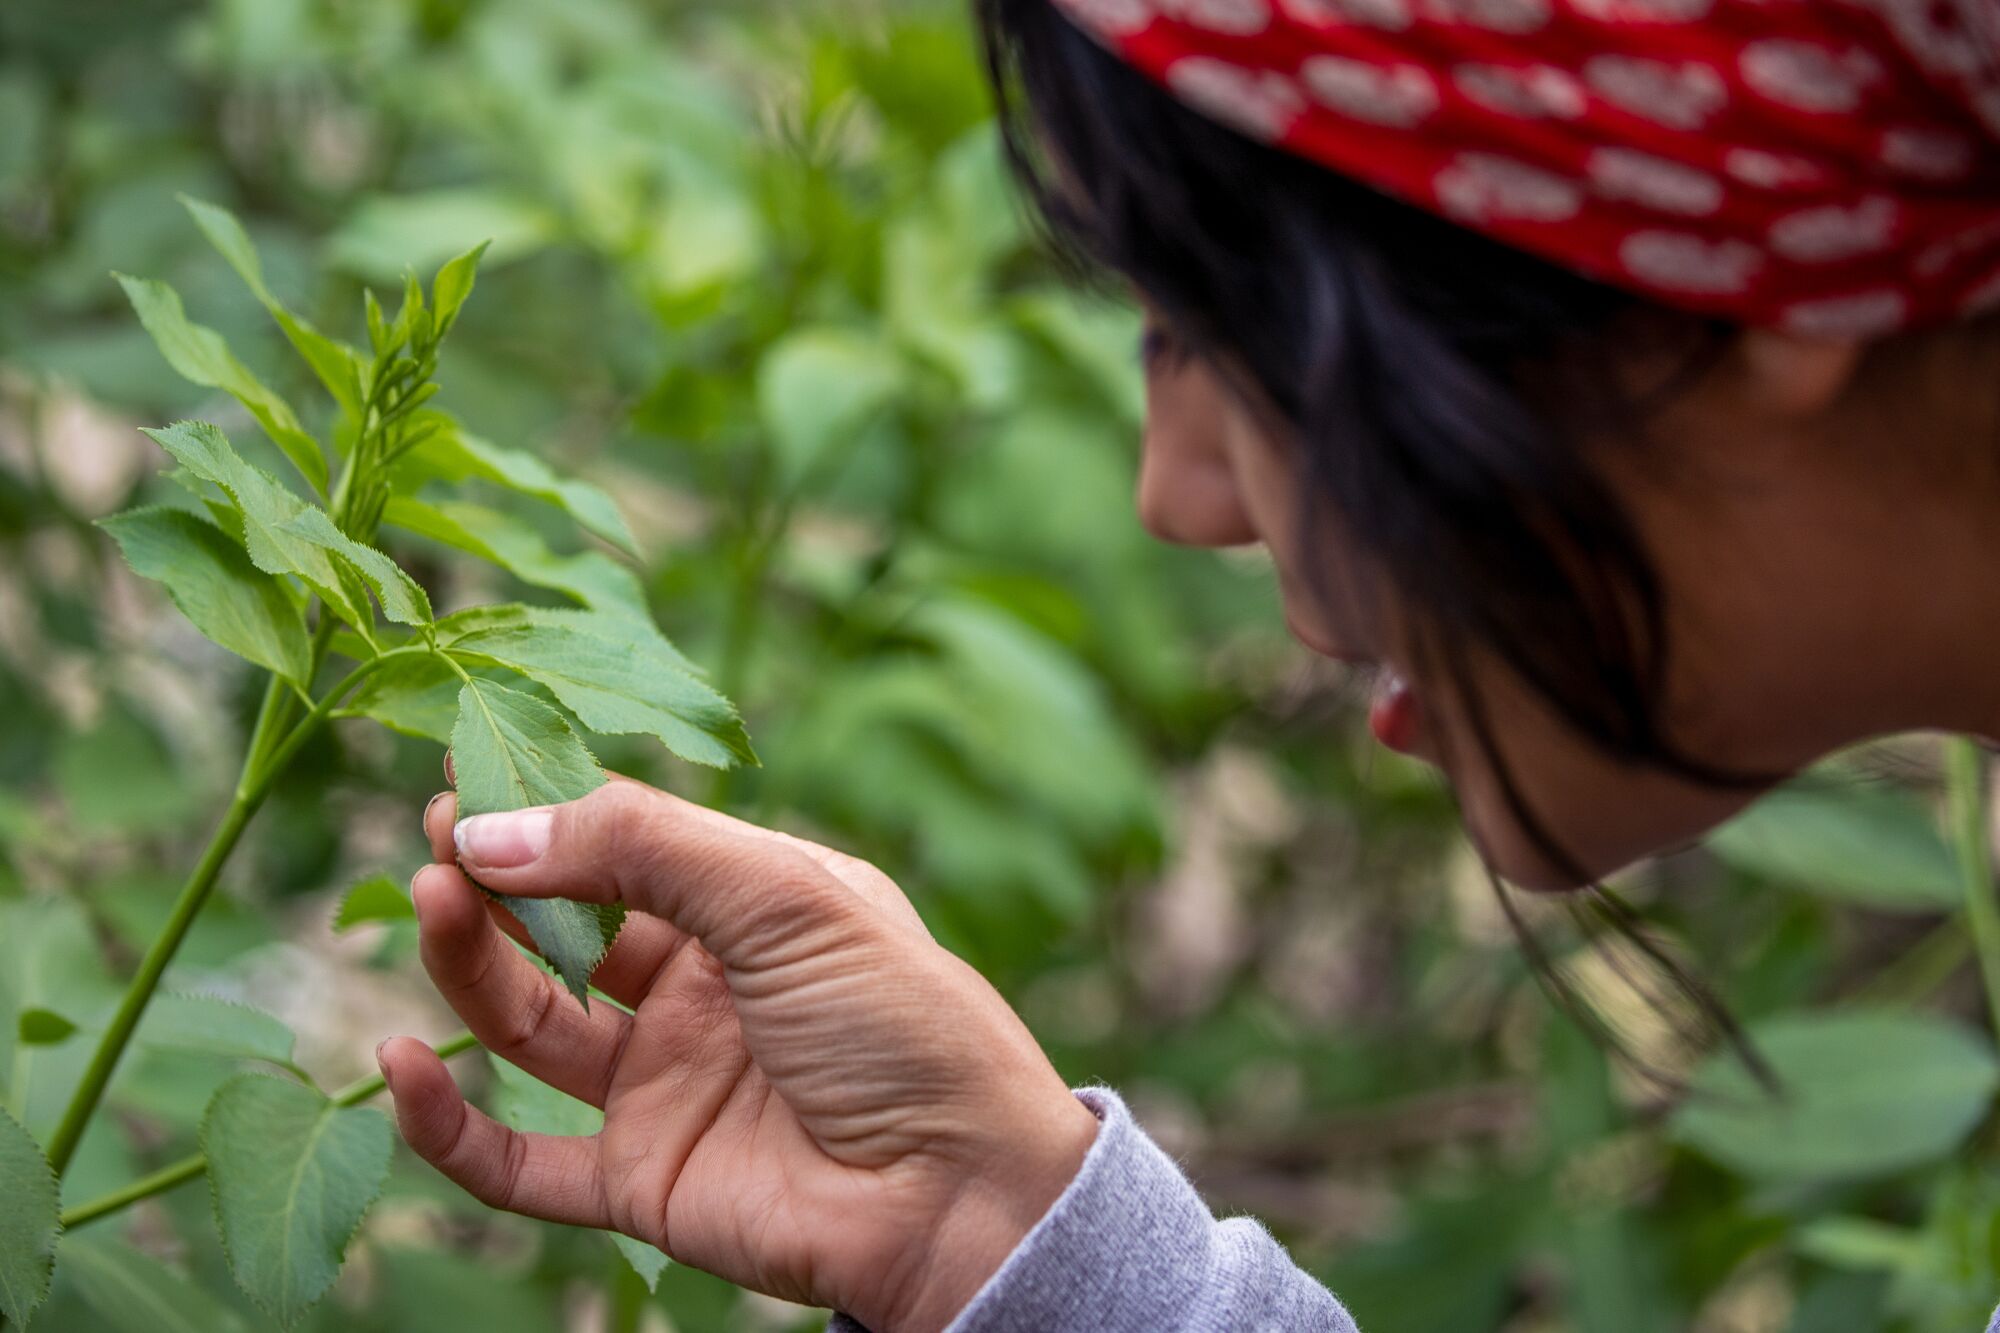 a woman in a red bandana touches the leaf of a plant